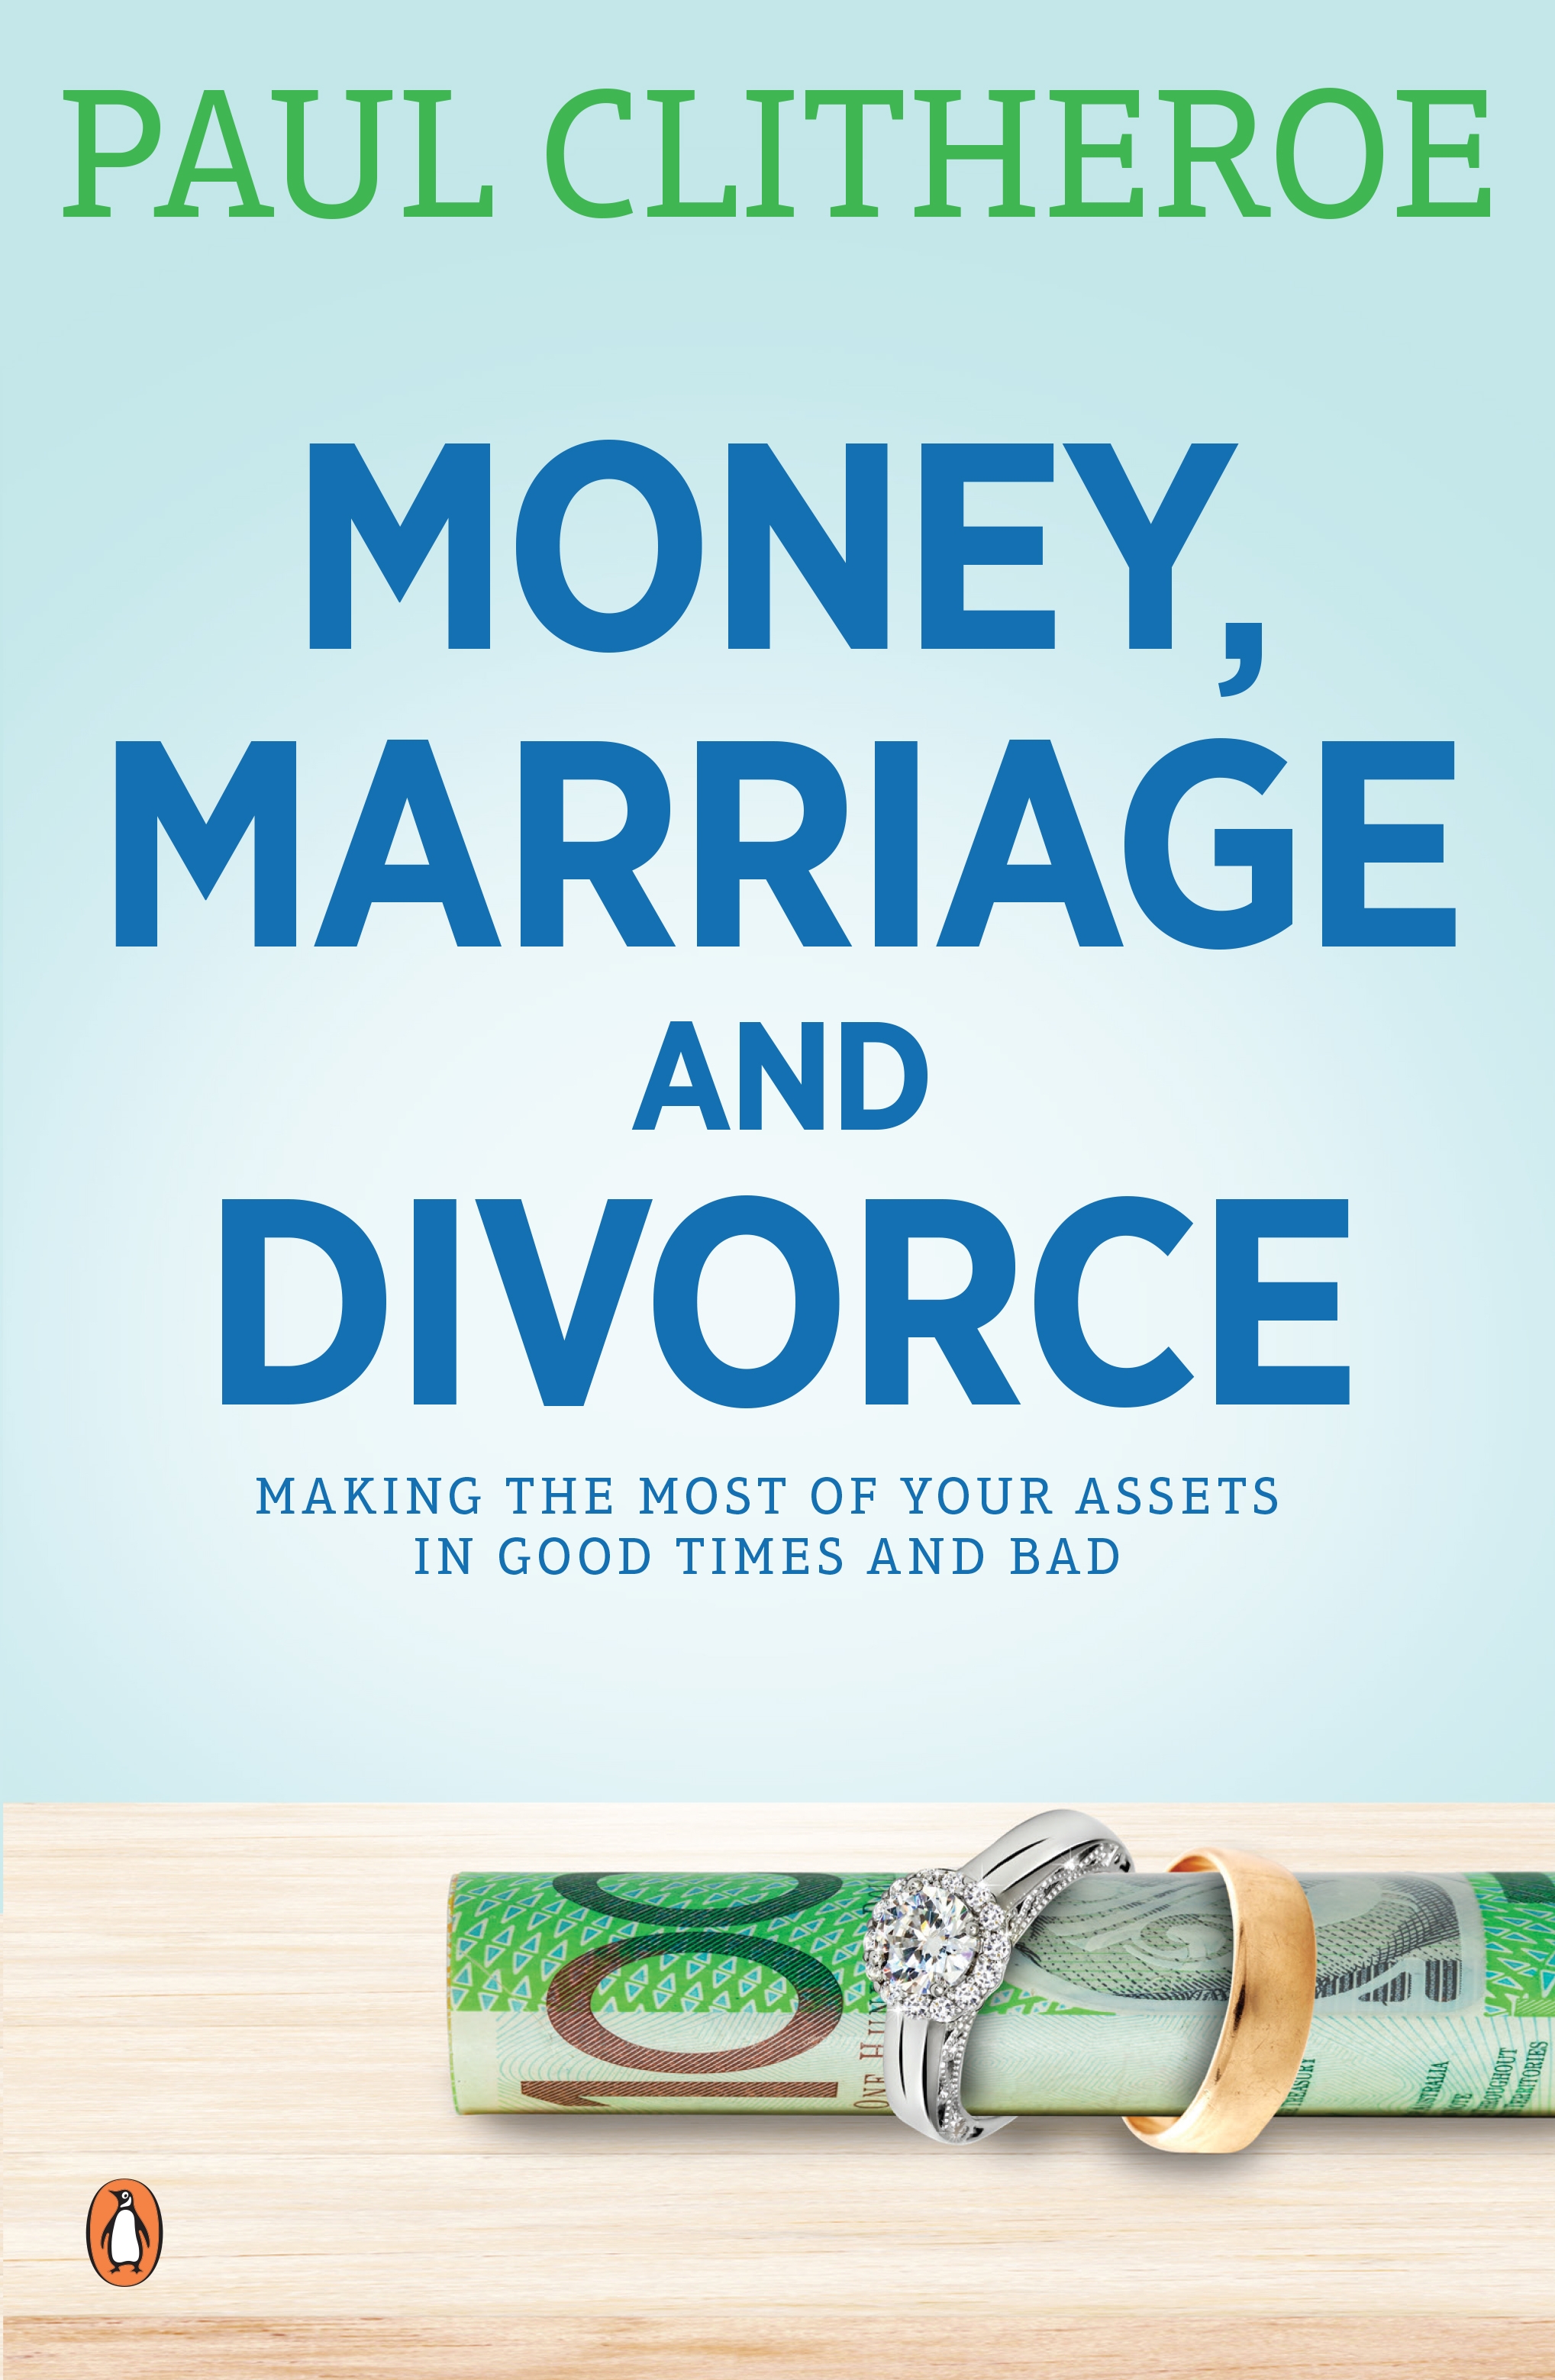 Money Marriage And Divorce By Paul Clitheroe Penguin Books Australia